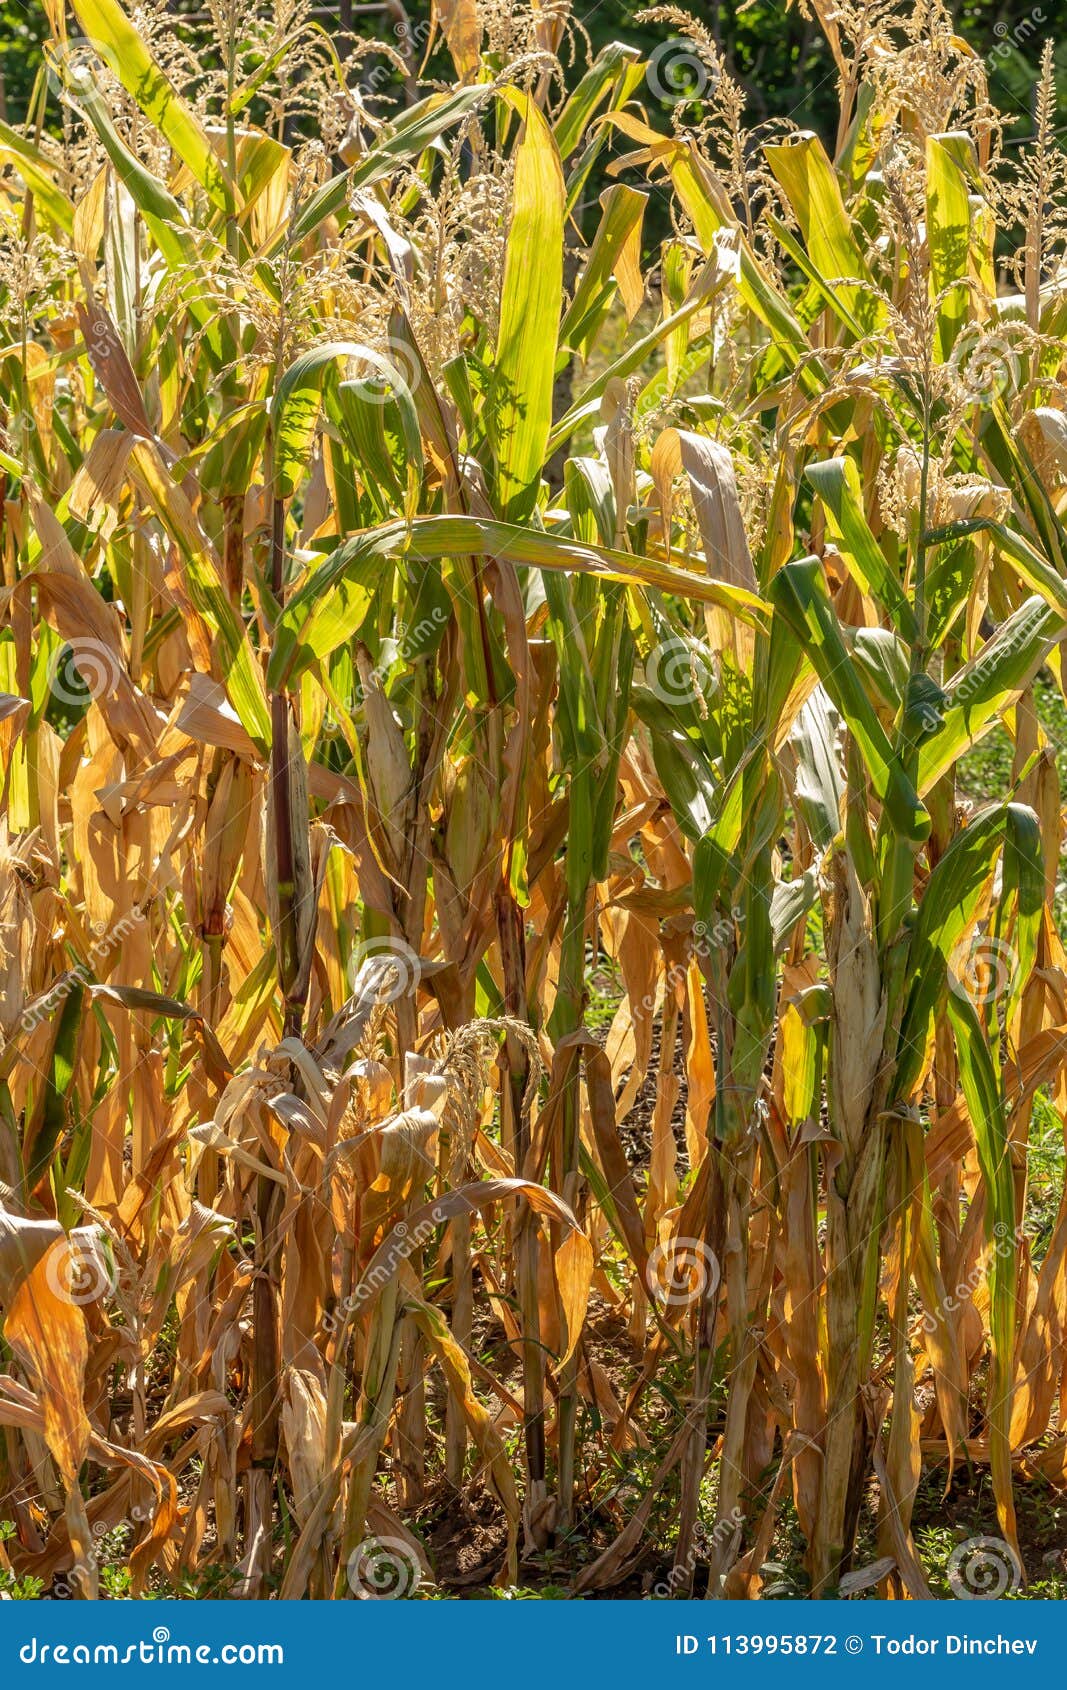 Maize Plants Zea Mays Stock Photo Image Of Grilled 113995872